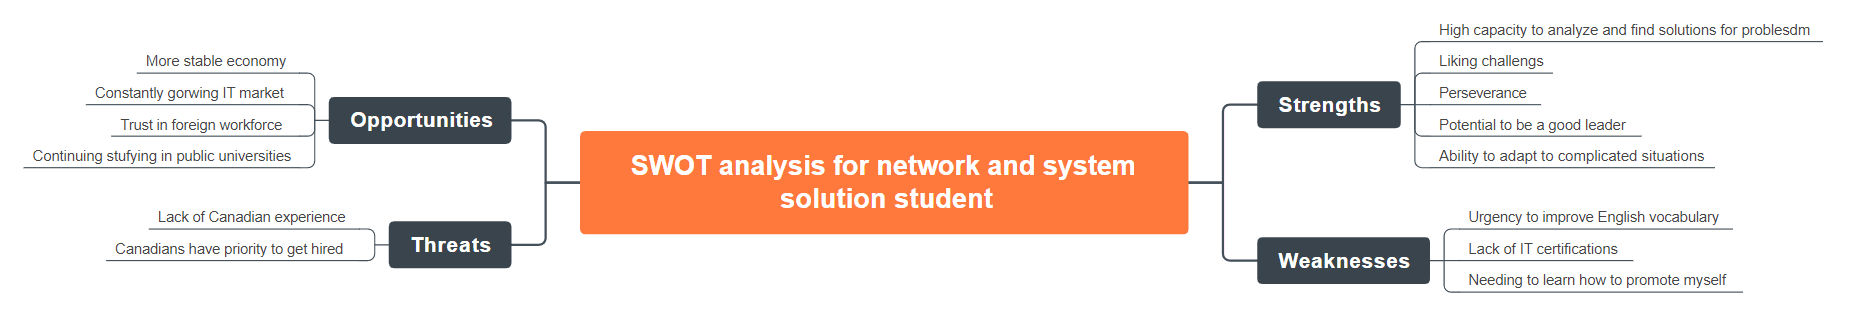 SWOT analysis for network and system solution student